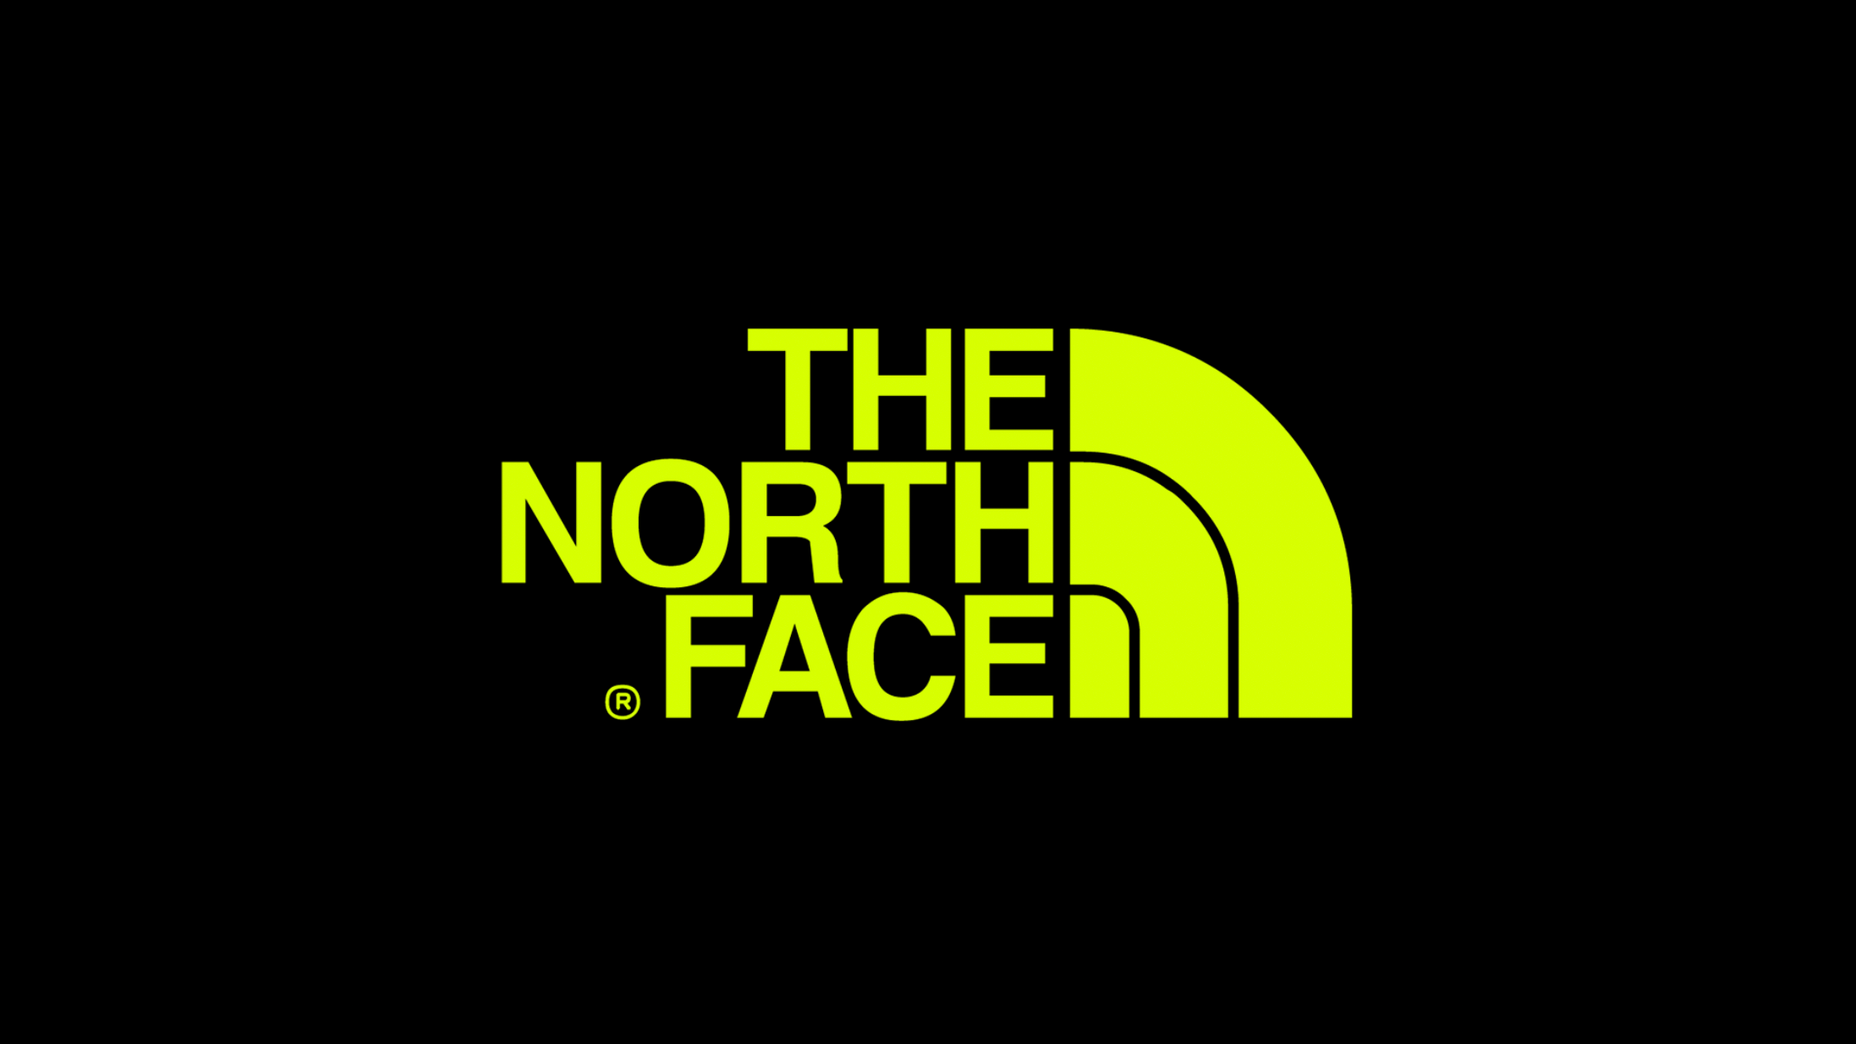 North Face Final Video 7:8